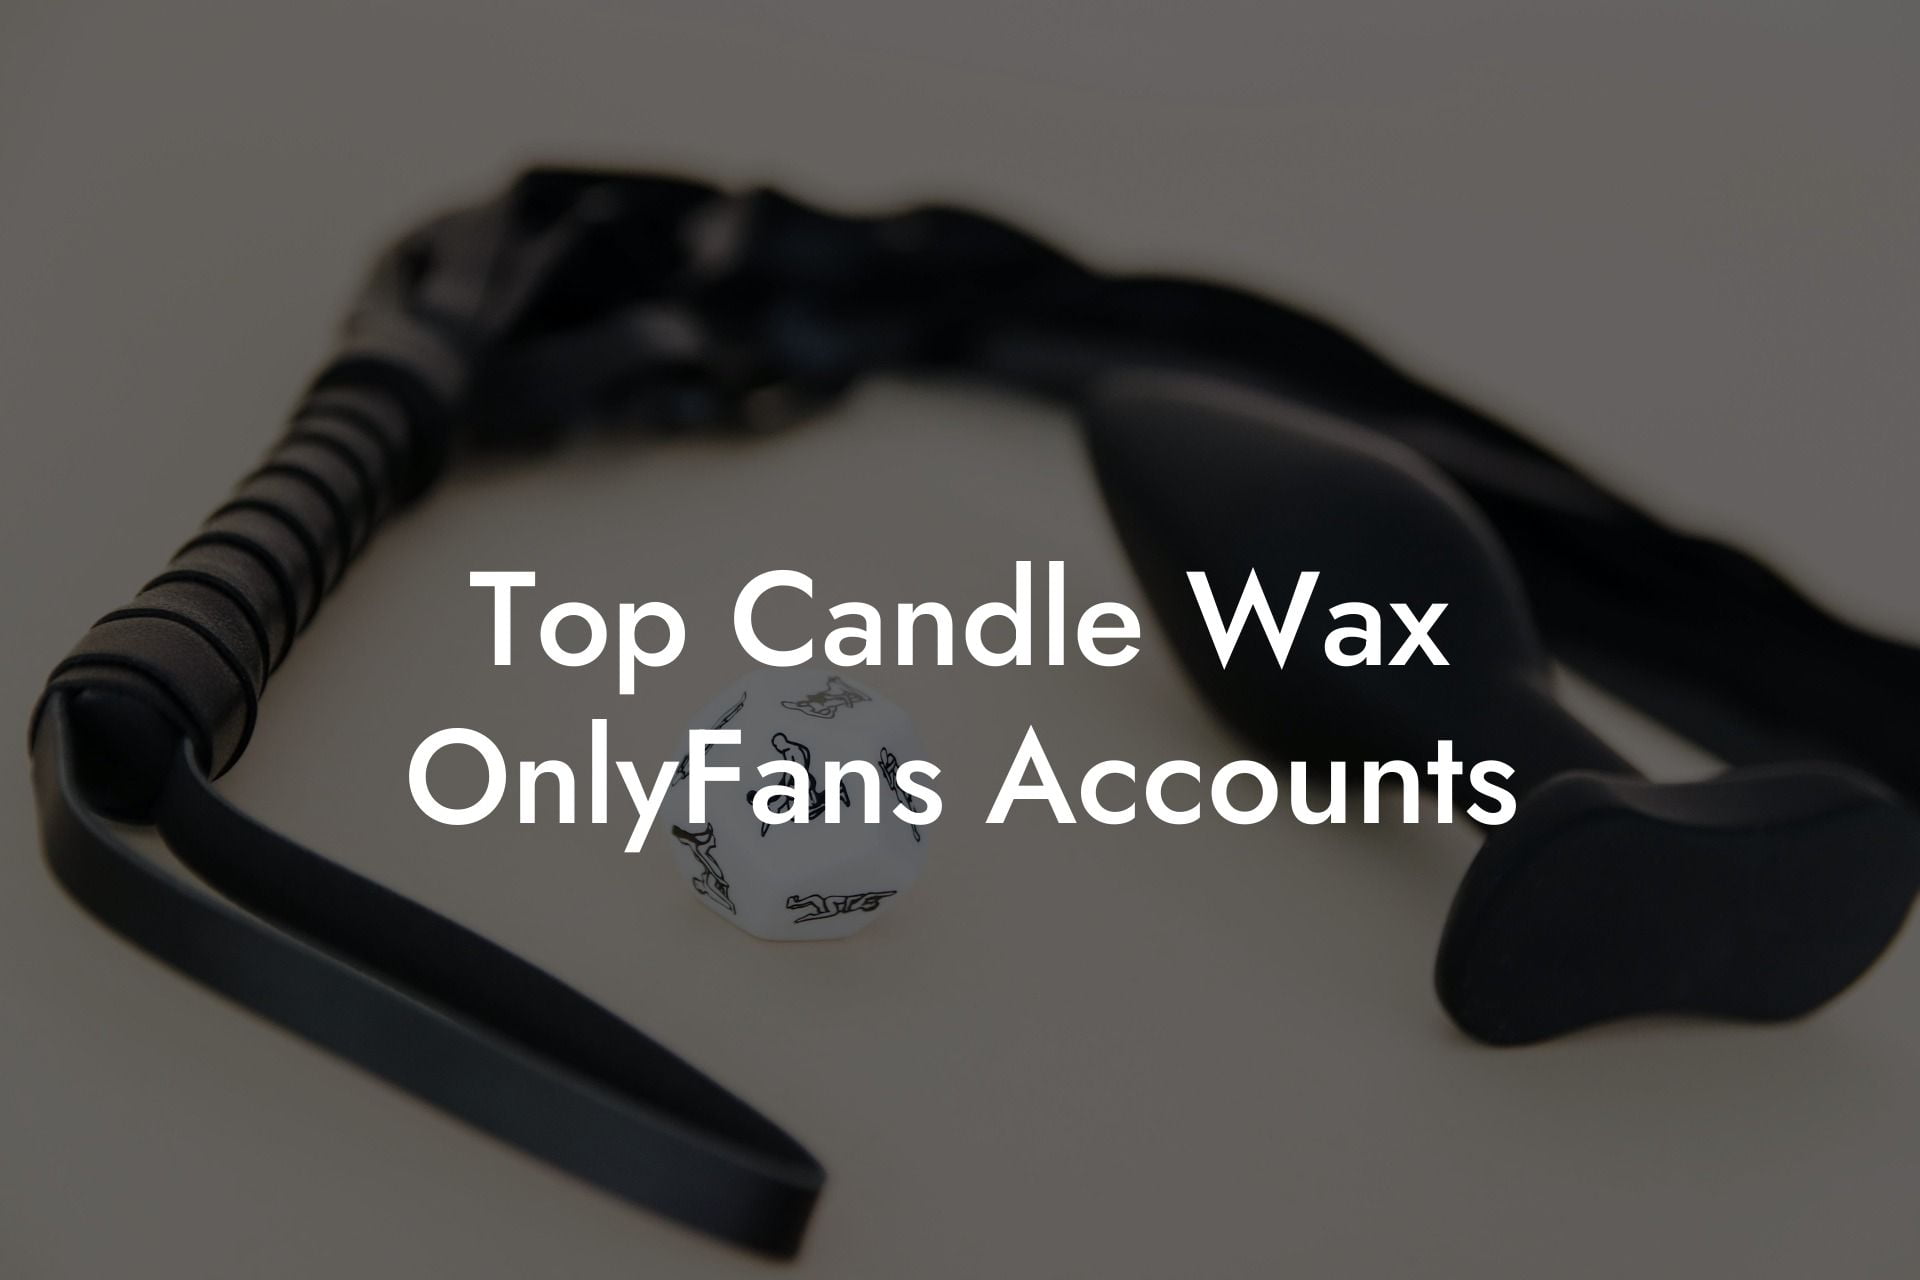 Top Candle Wax OnlyFans Accounts